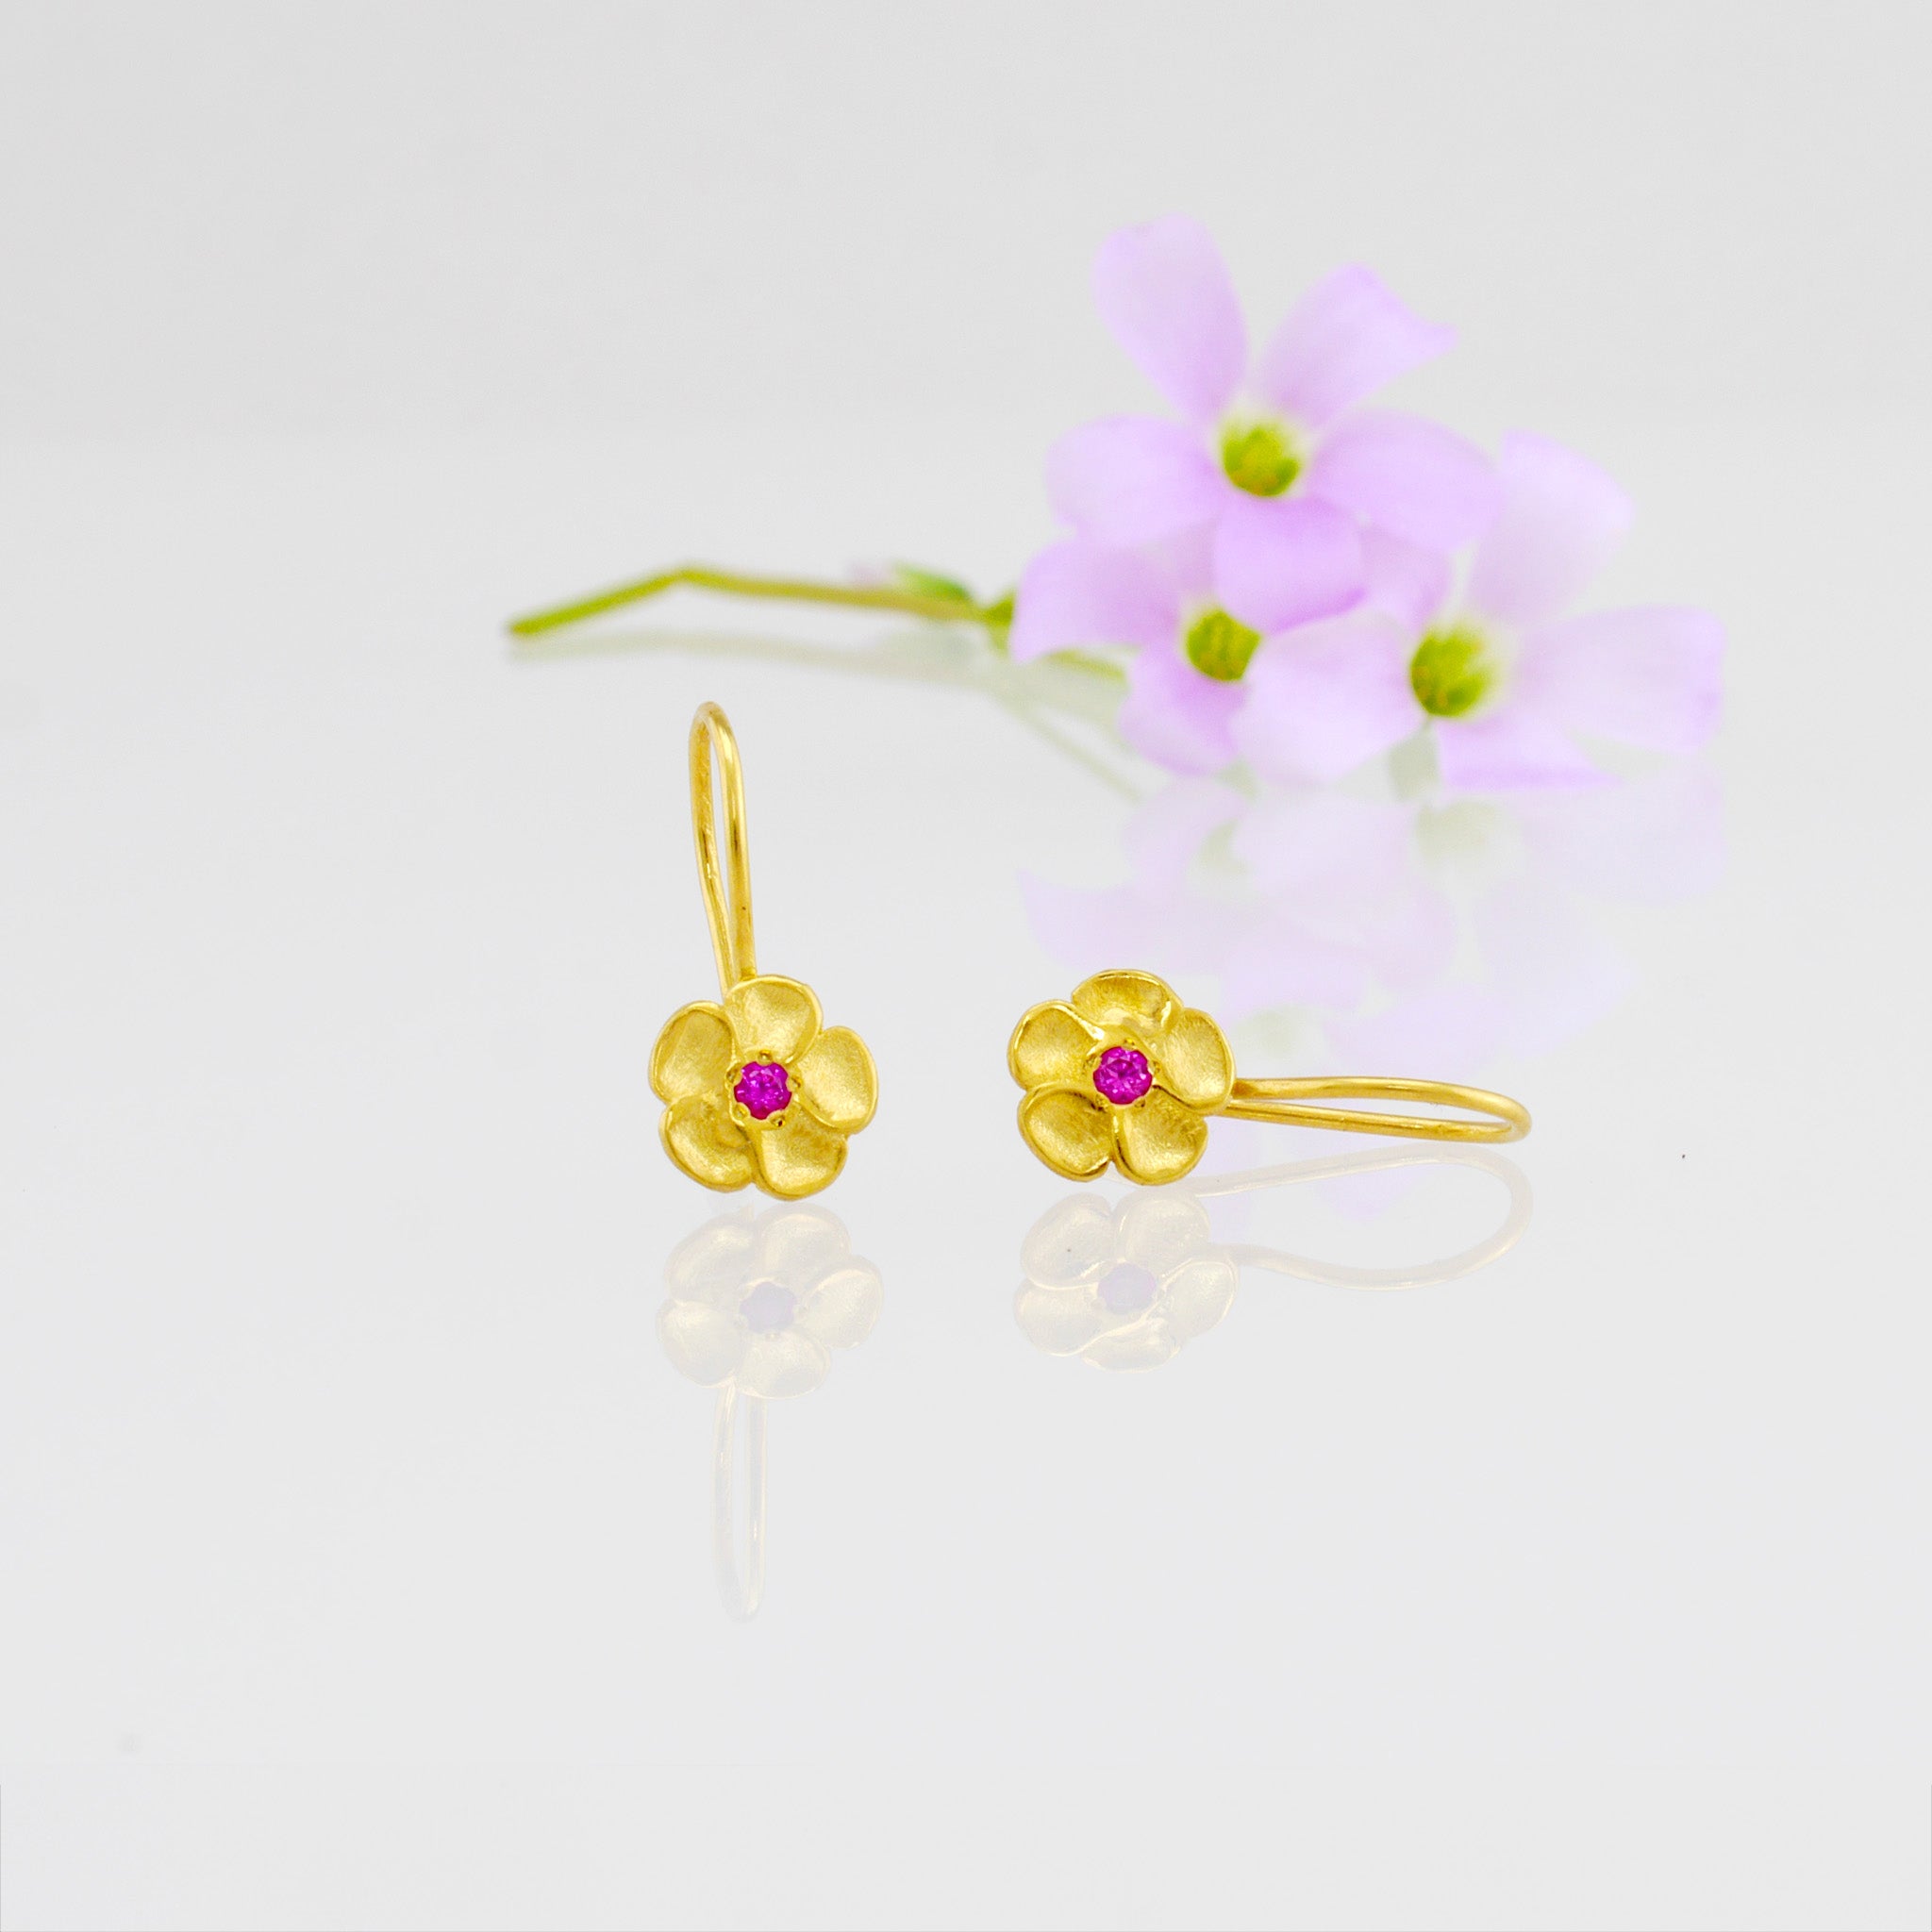 Delicate yellow gold flower drop earrings with a sparkling ruby center. Perfect for any occasion!